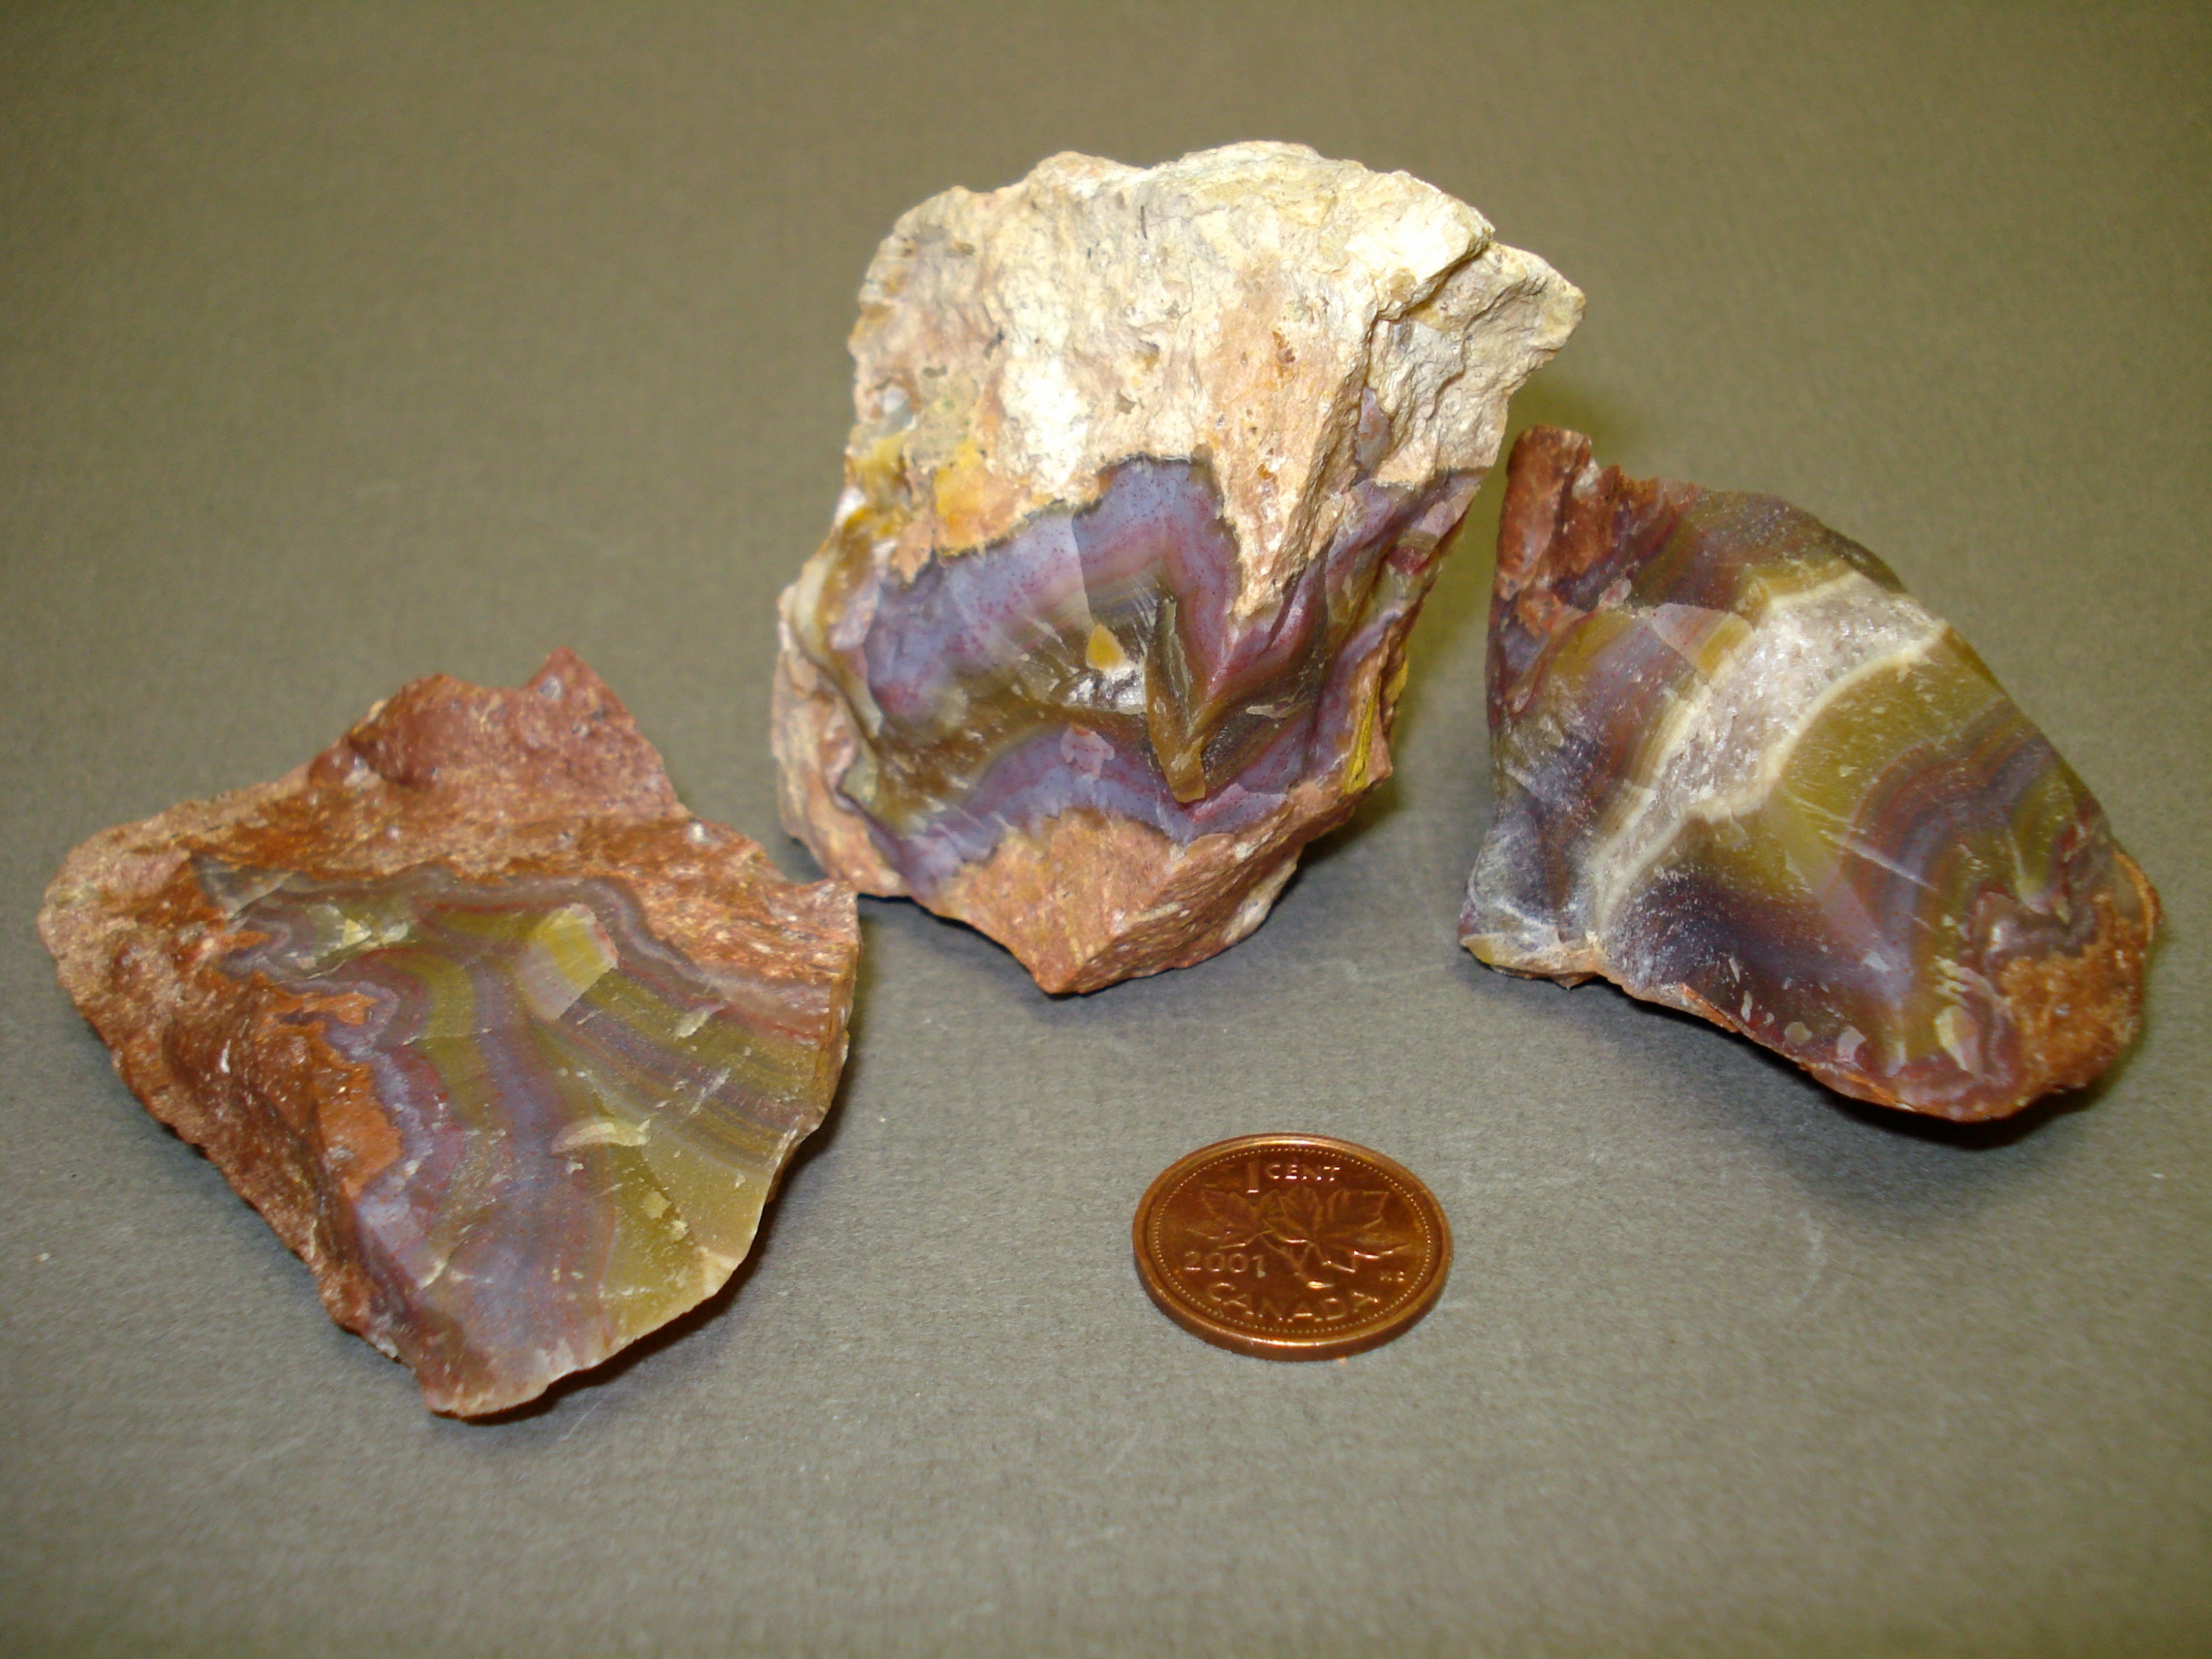 Rainbow Agate next to a penny for size comparison